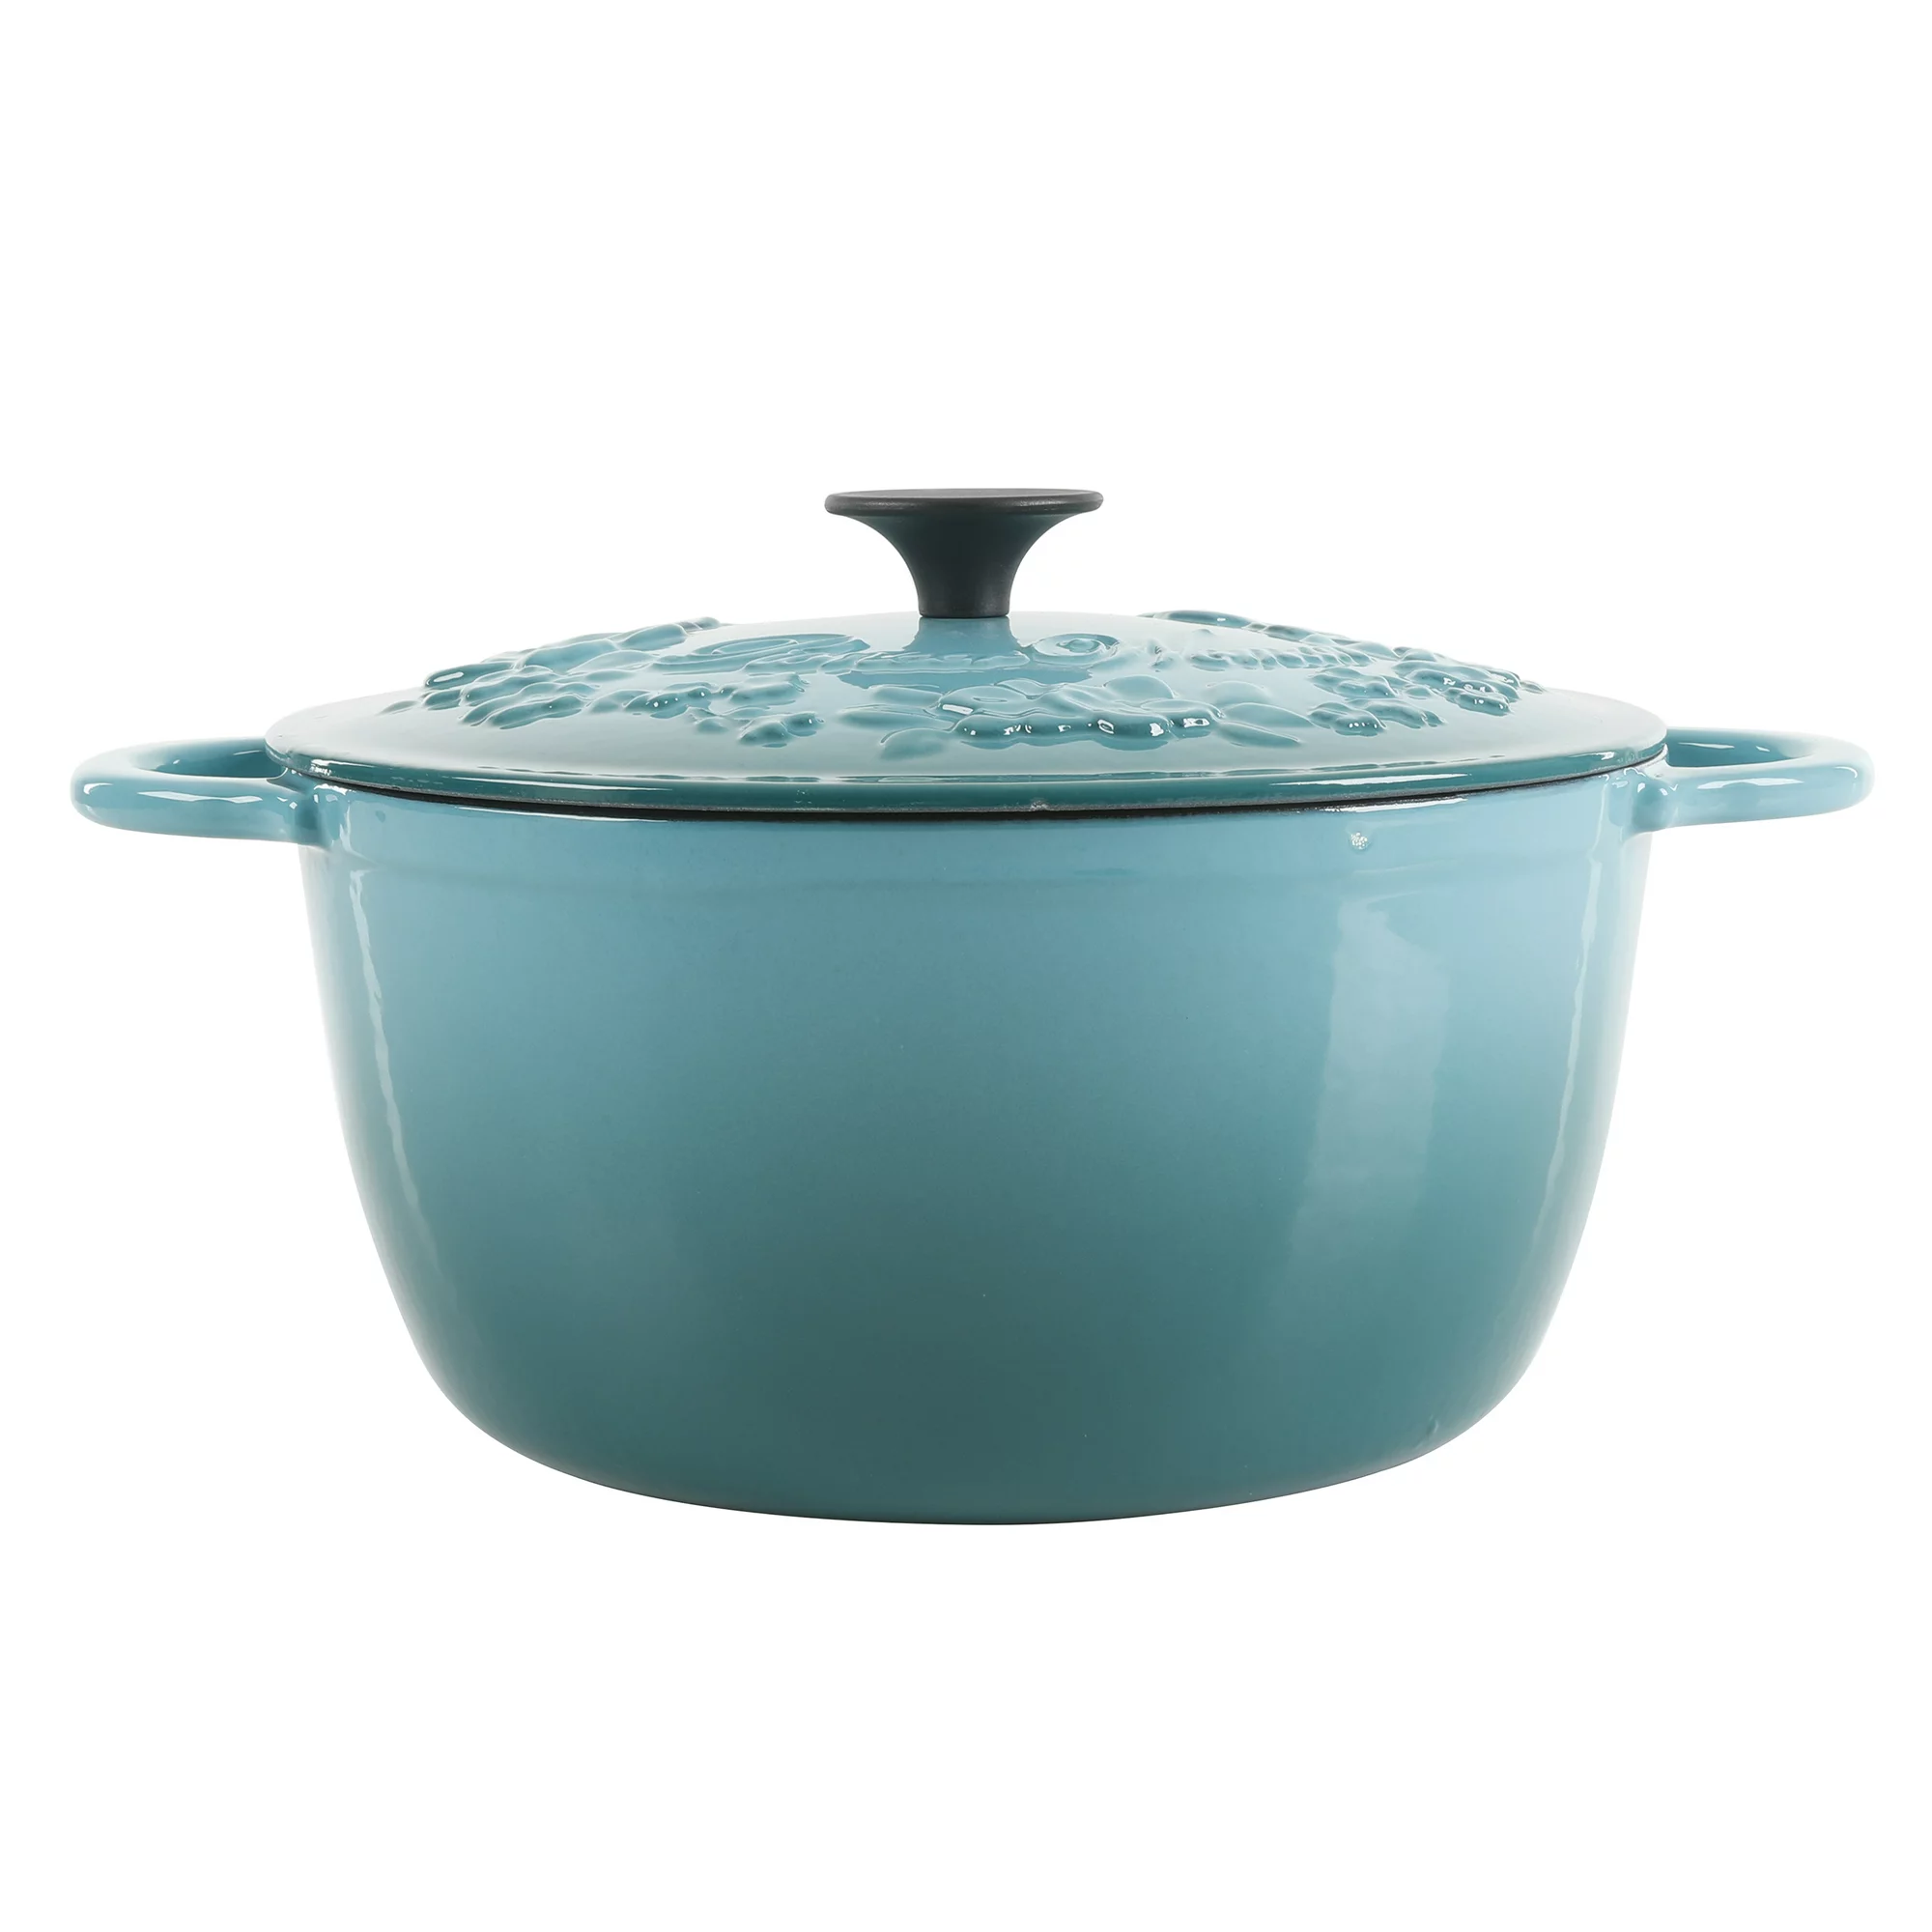 https://discounttoday.net/wp-content/uploads/2022/12/The-Pioneer-Woman-Timeless-Beauty-Enamel-on-Cast-Iron-6-Qt-Dutch-Oven-Turquoise1.webp